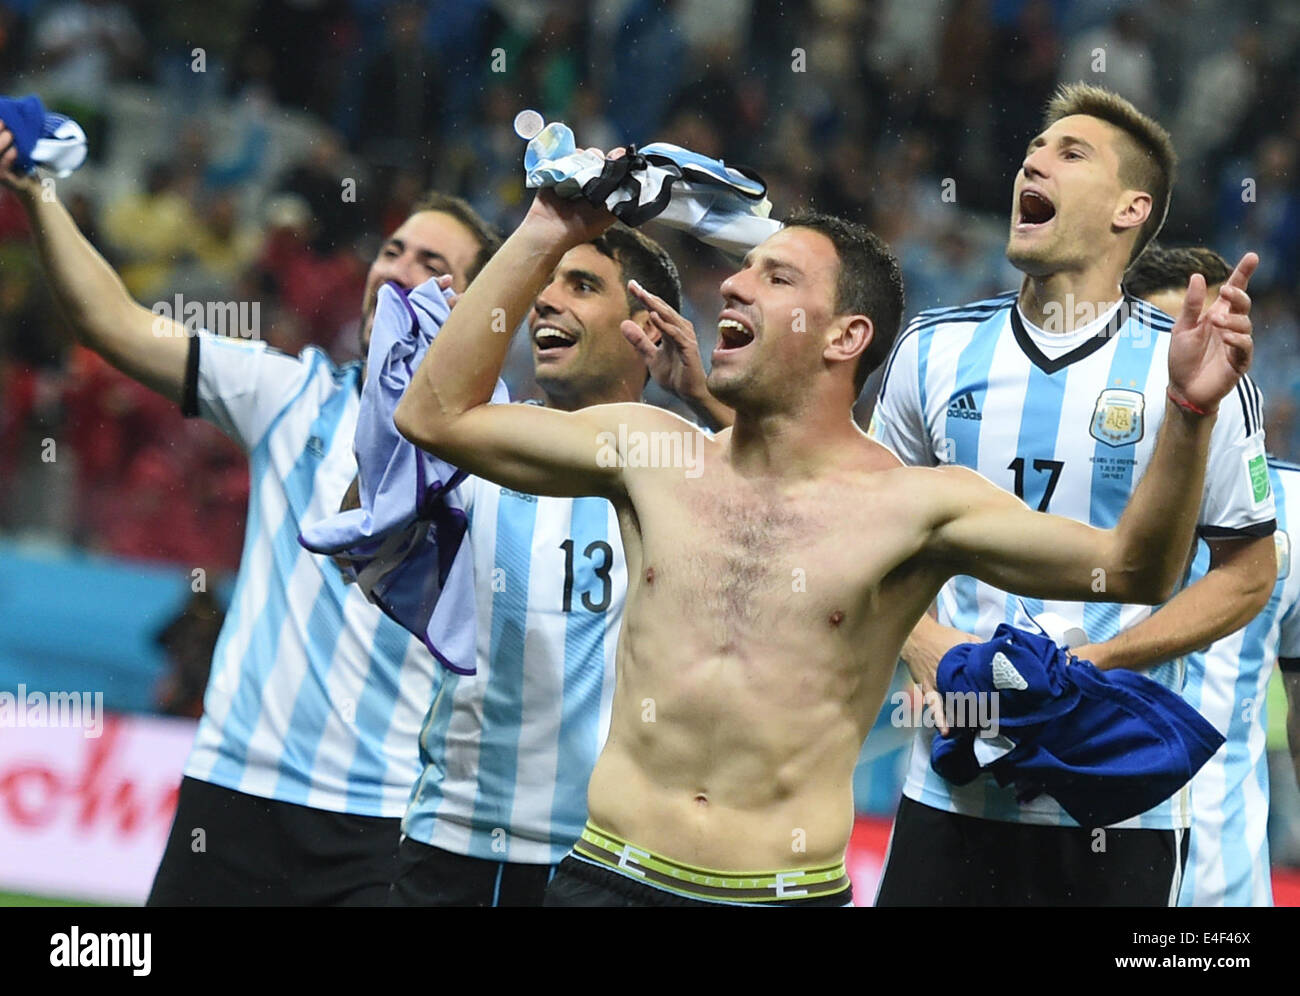 Sao Paulo, Brazil. 09th July, 2014. Argentina's Maxi Rodriguez (C) celebrates after the FIFA World Cup 2014 semi-final soccer match between the Netherlands and Argentina at the Arena Corinthians in Sao Paulo, Brazil, 09 July 2014. Photo: Marius Becker/dpa/Alamy Live News Stock Photo